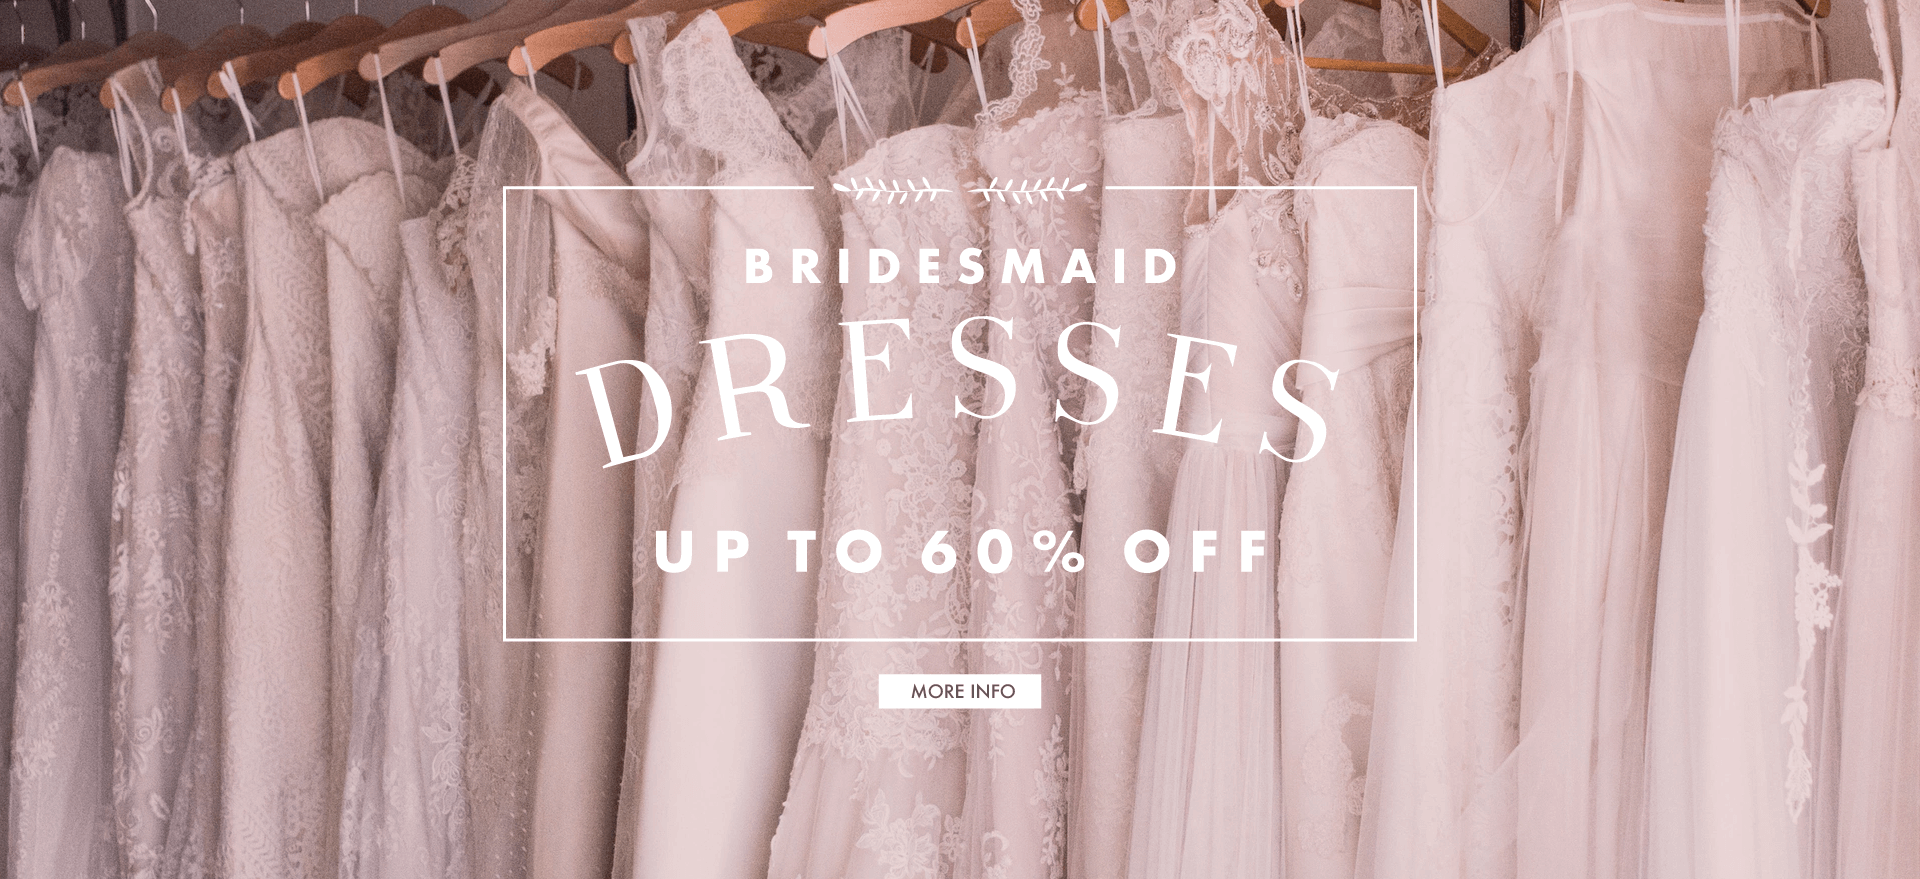 Bridesmaid Dresses Discount Up To 60%